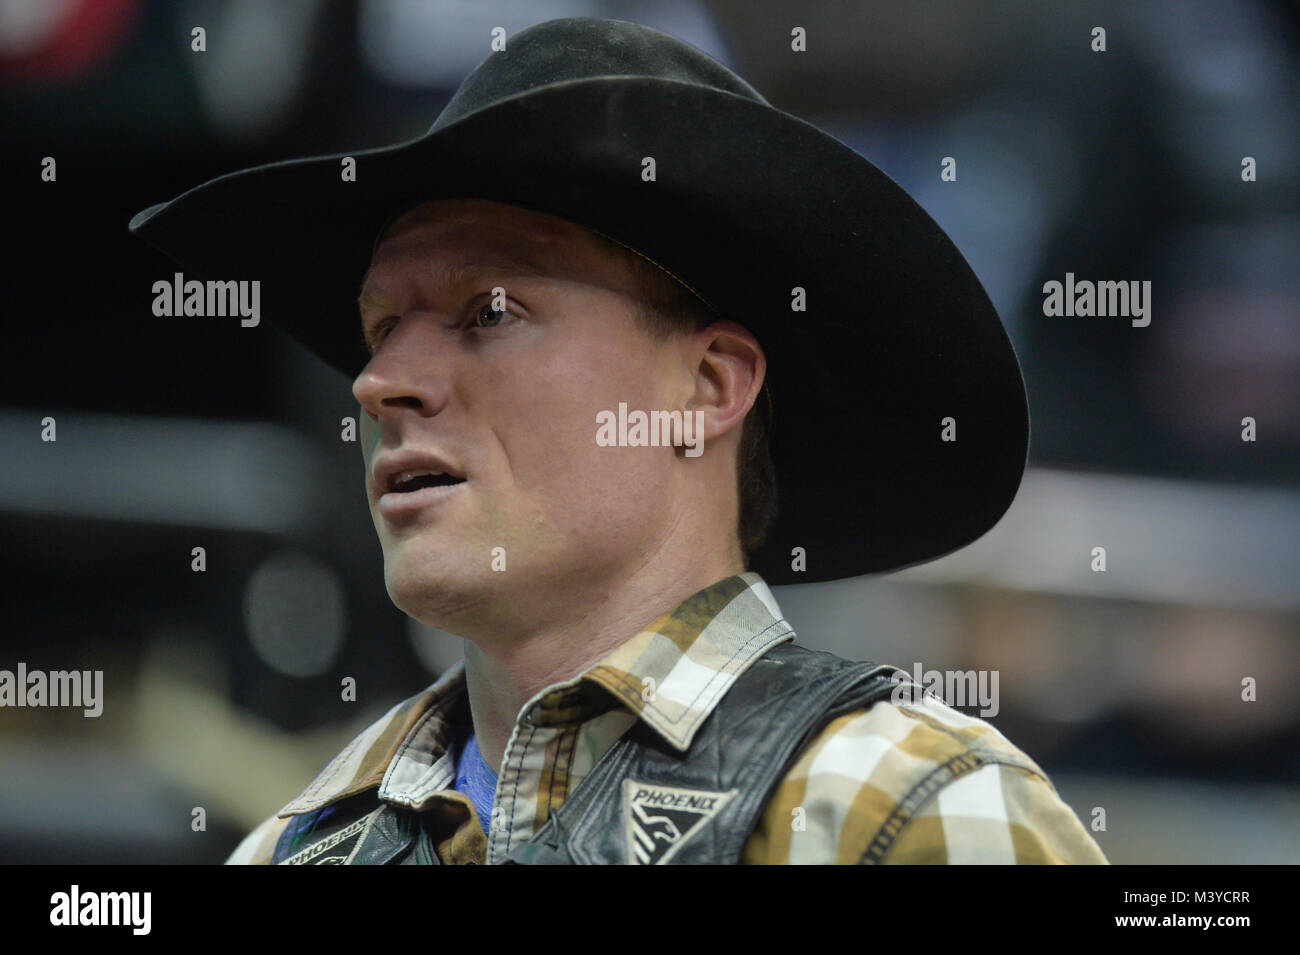 Kansas City, Missouri, USA. 11th Feb, 2018. CODY CAMPBELL looks into the crowd during the second day of competition of the PBR Caterpillar Classic held at the Sprint Center in Kansas City, Missouri. Credit: Amy Sanderson/ZUMA Wire/Alamy Live News Stock Photo